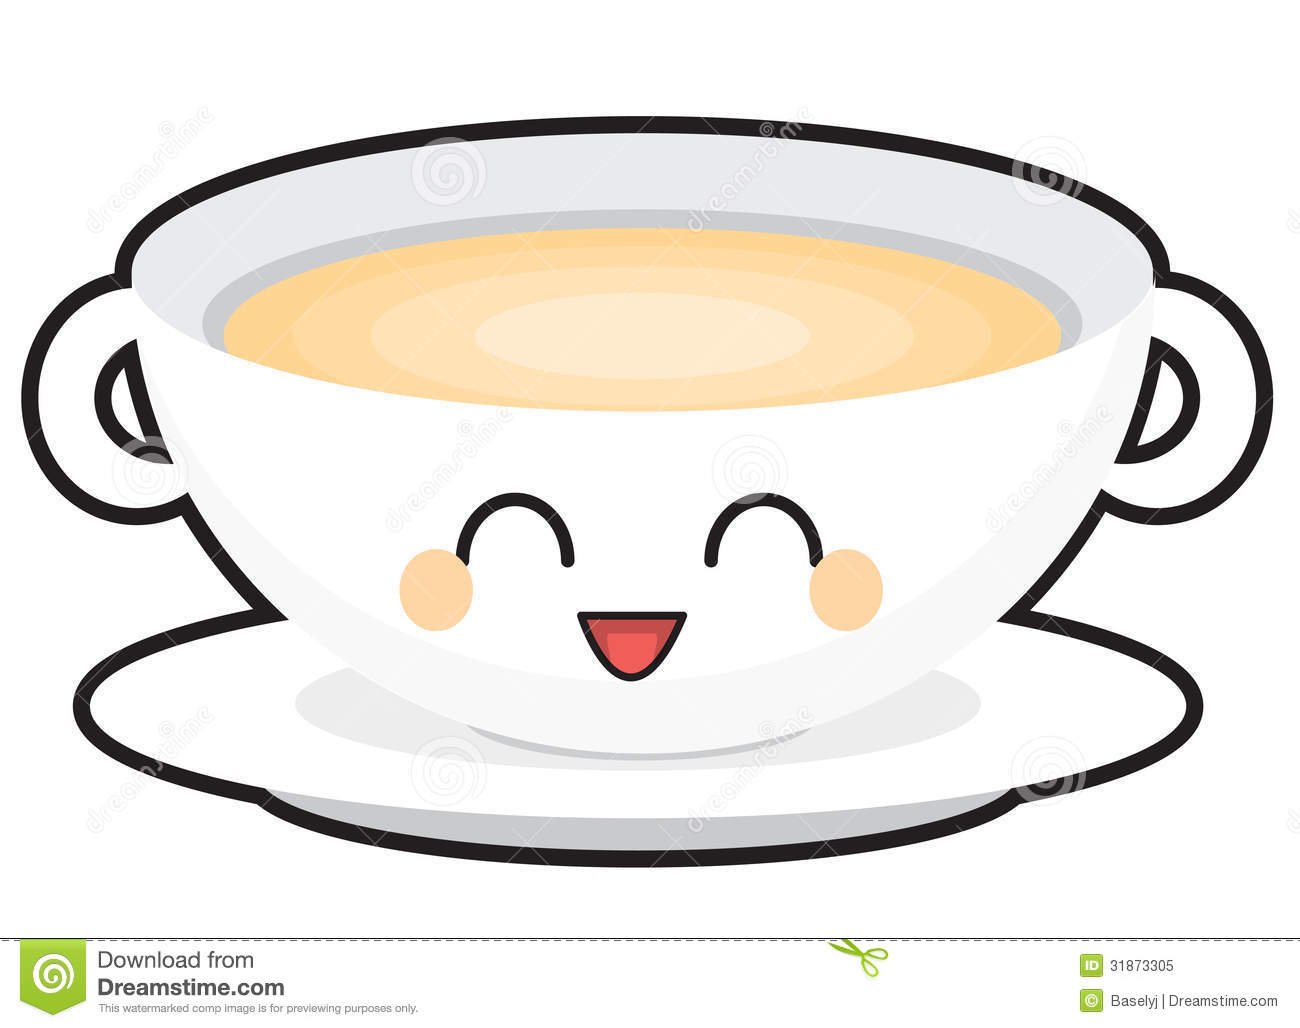 Illustration Of A Bowl Of Soup With A Smiley Face